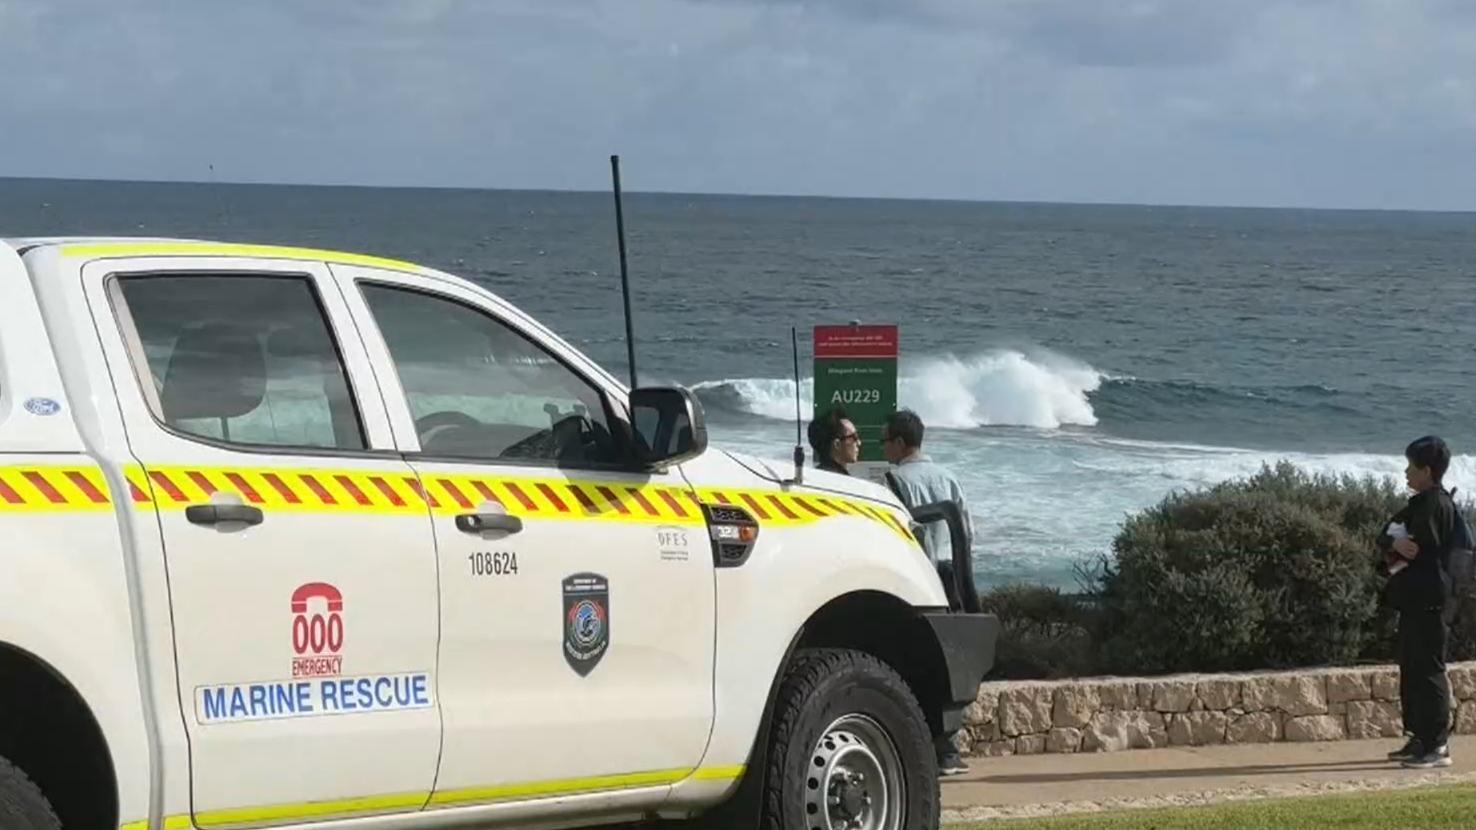 Police have called off the search for a missing surfer